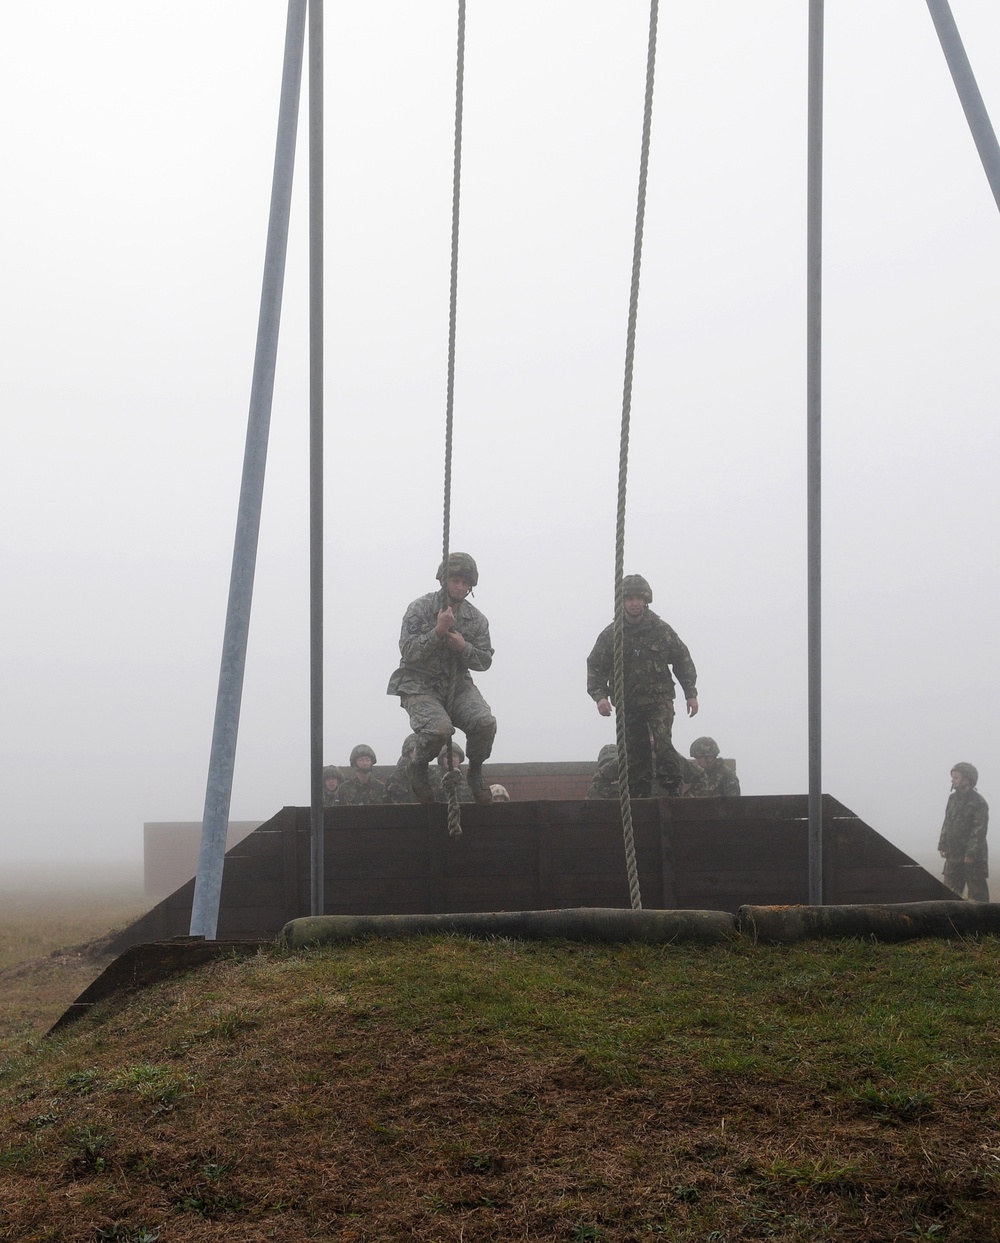 American, British forces join for leadership development